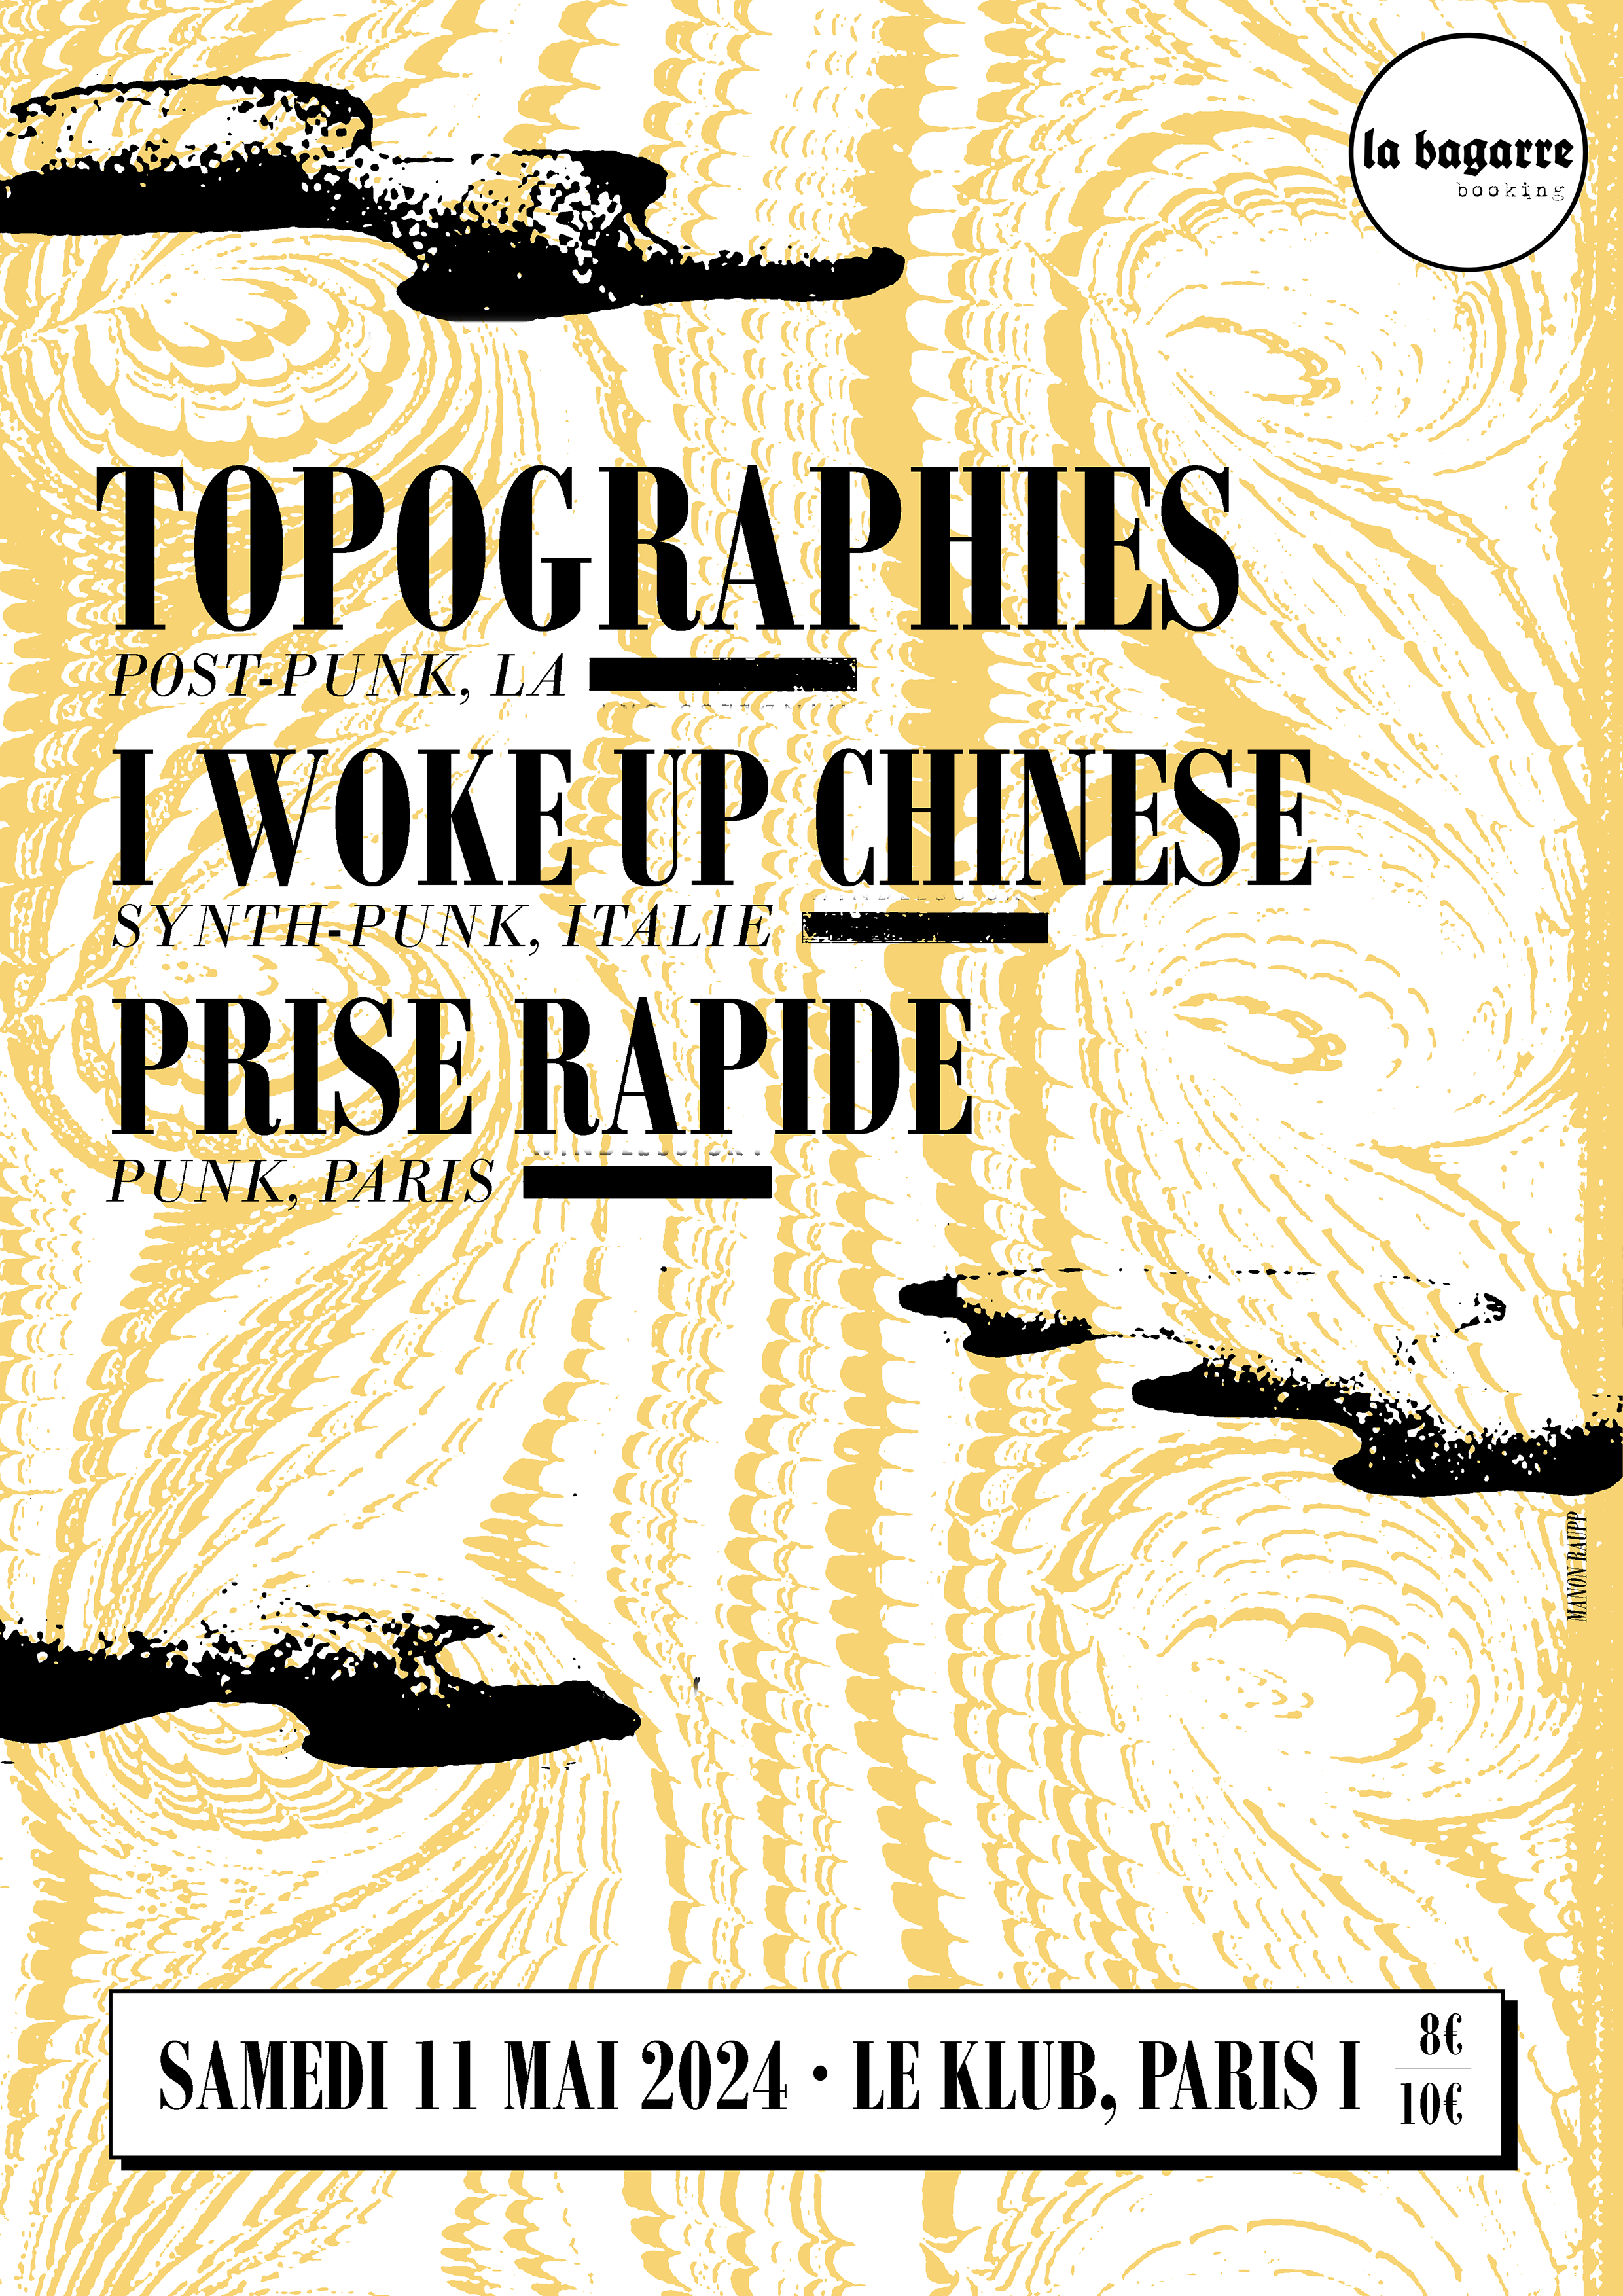 TOPOGRAPHIES + I WOKE UP CHINESE + PRISE RAPIDE ■ 11.05